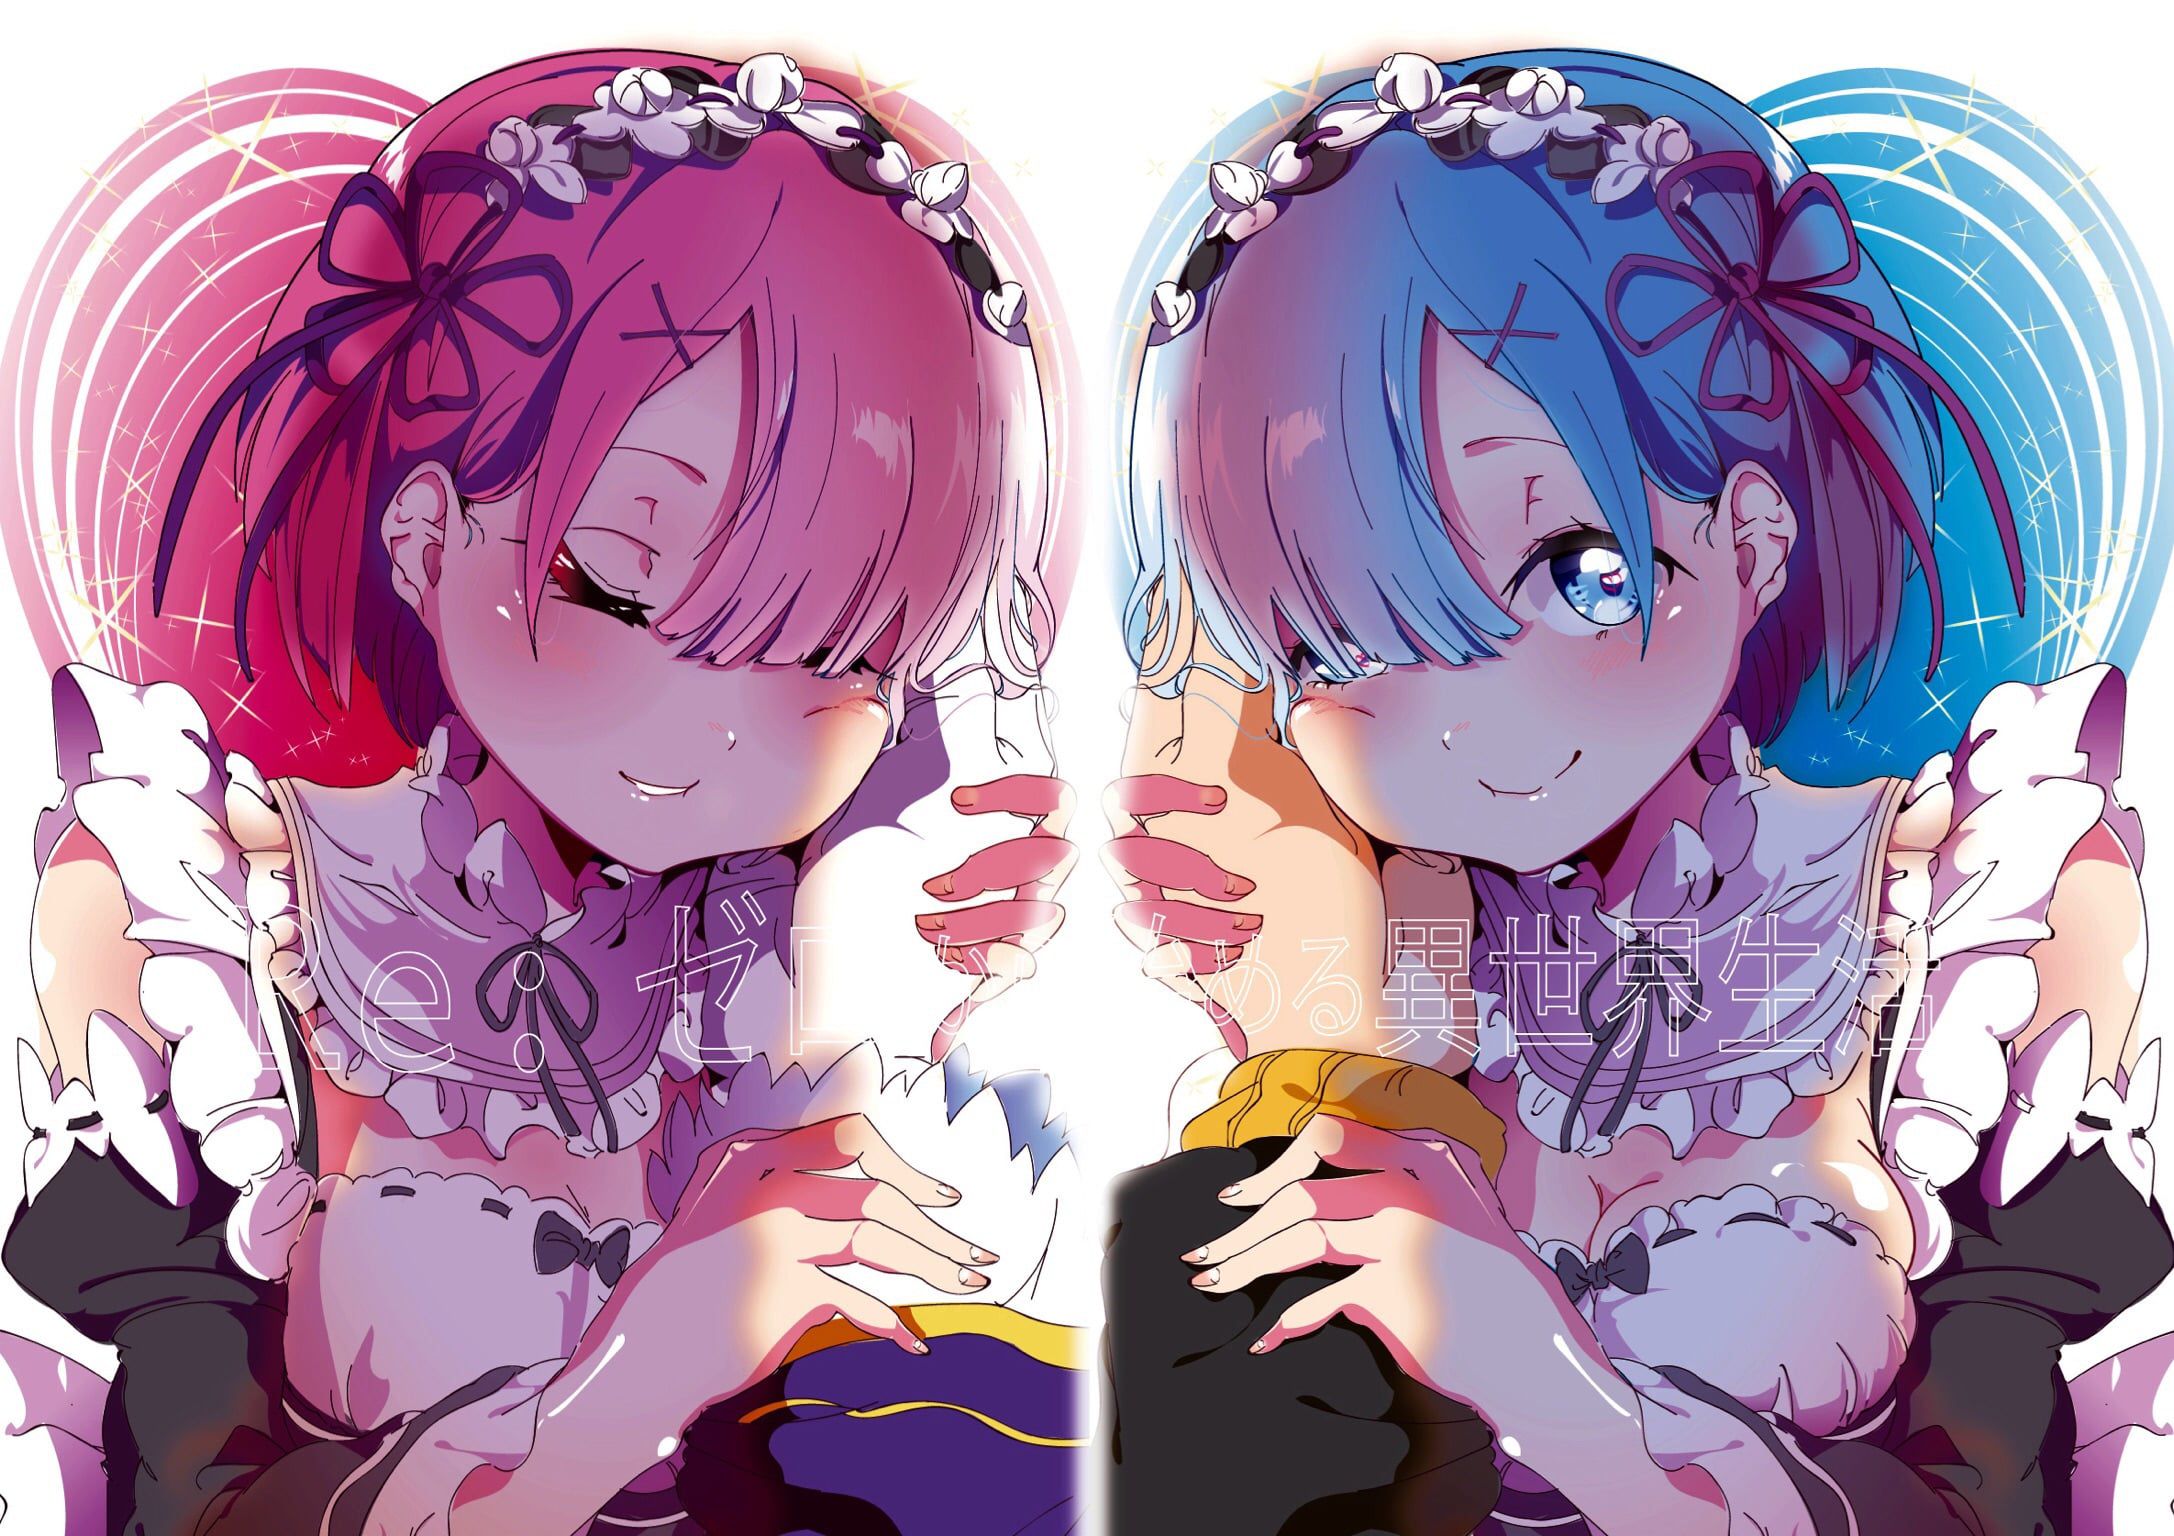 [Rezero] Re: MoE different world life starting from scratch images part 1 8